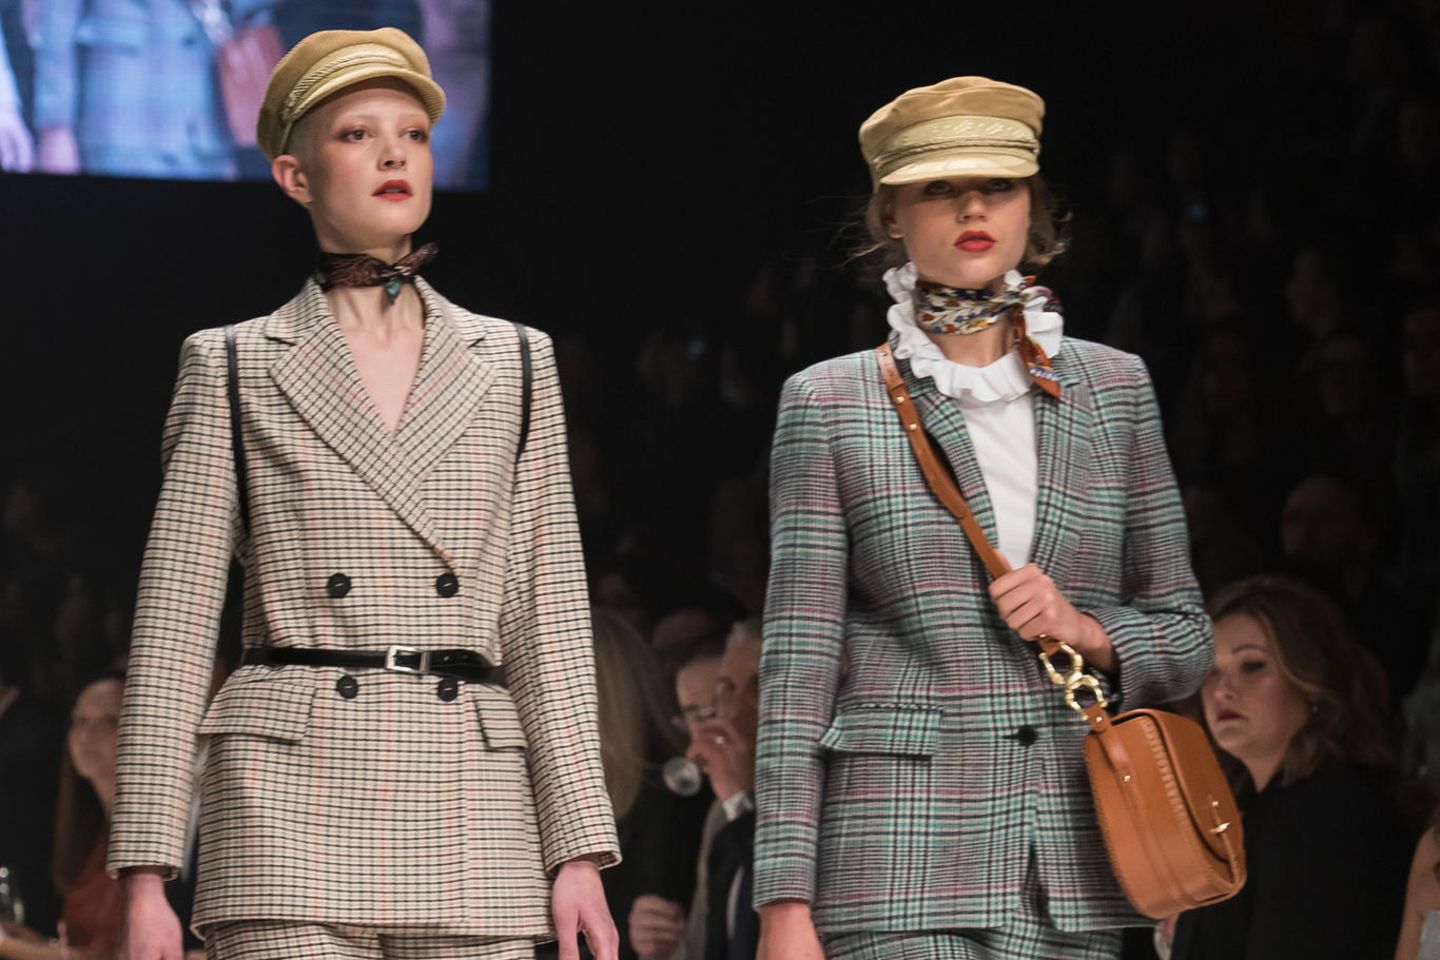 The preppy style is already very fashionable on the catwalks